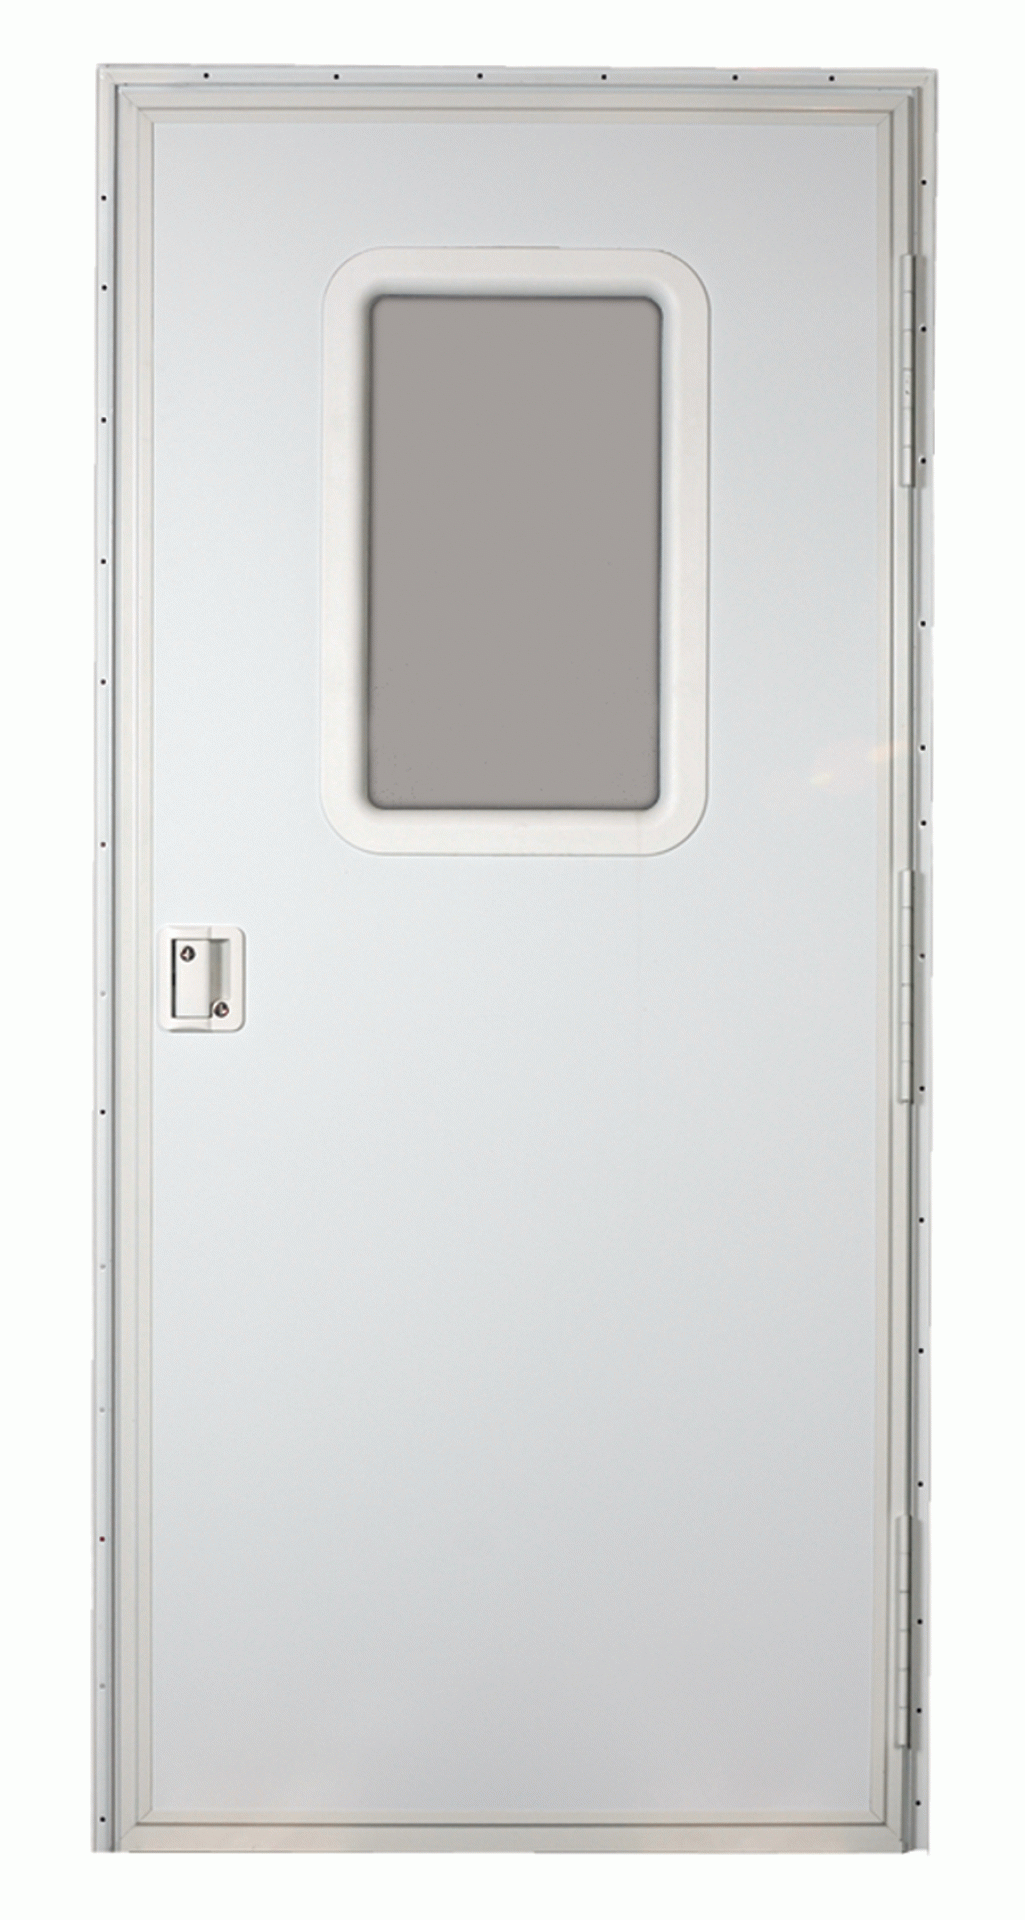 AP PRODUCTS | 015-217713 | TOWABLE ENTRY DOOR RH SQUARE - 24" x 72" - POLAR WHITE